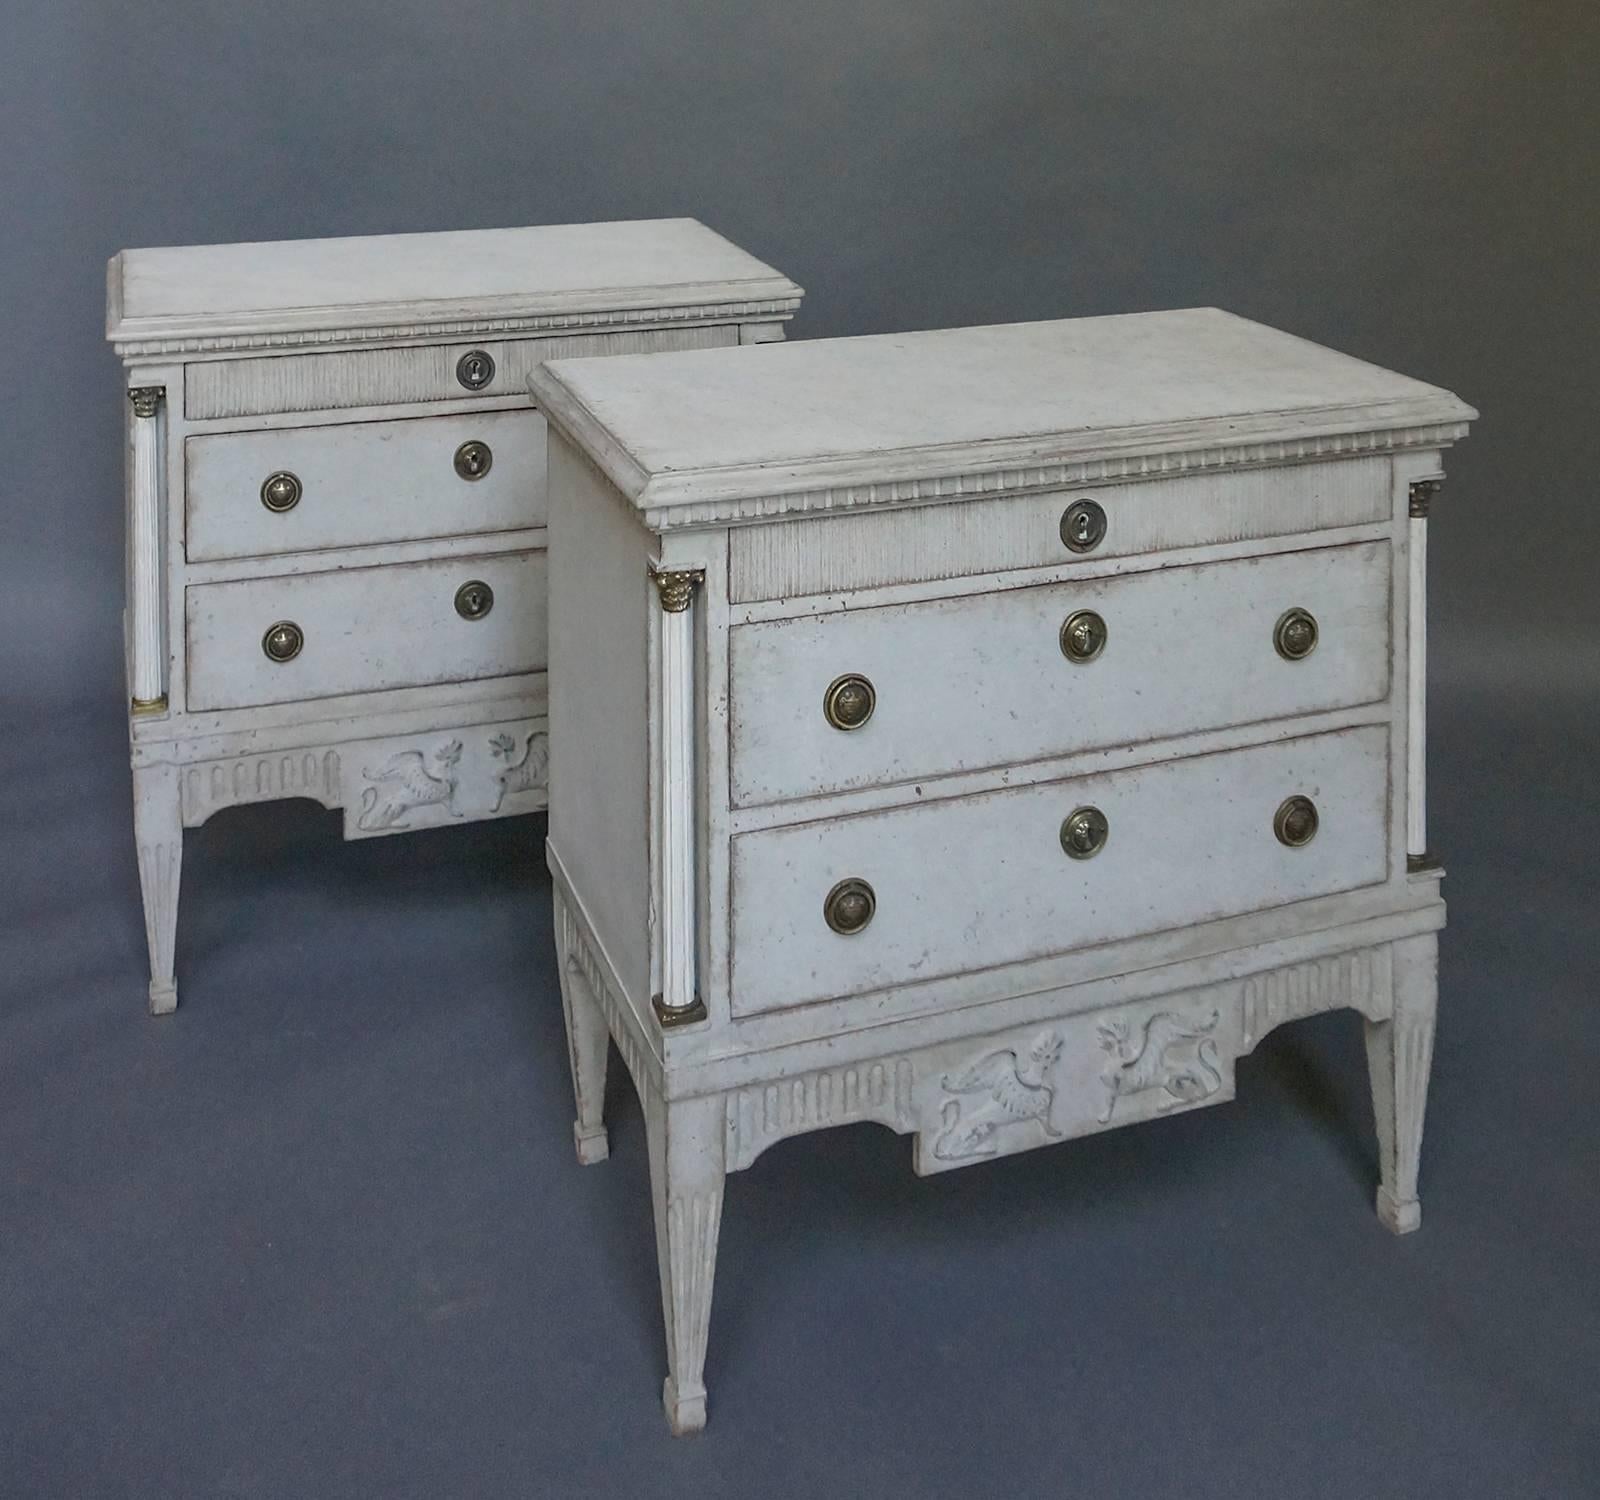 Pair of Swedish neoclassical style commodes, circa 1880, with fully round columns at the corners. Dentil molding around the top and vertical reeding on the top drawer front. In the center of the aprons are panels with facing sphinxes which guard the